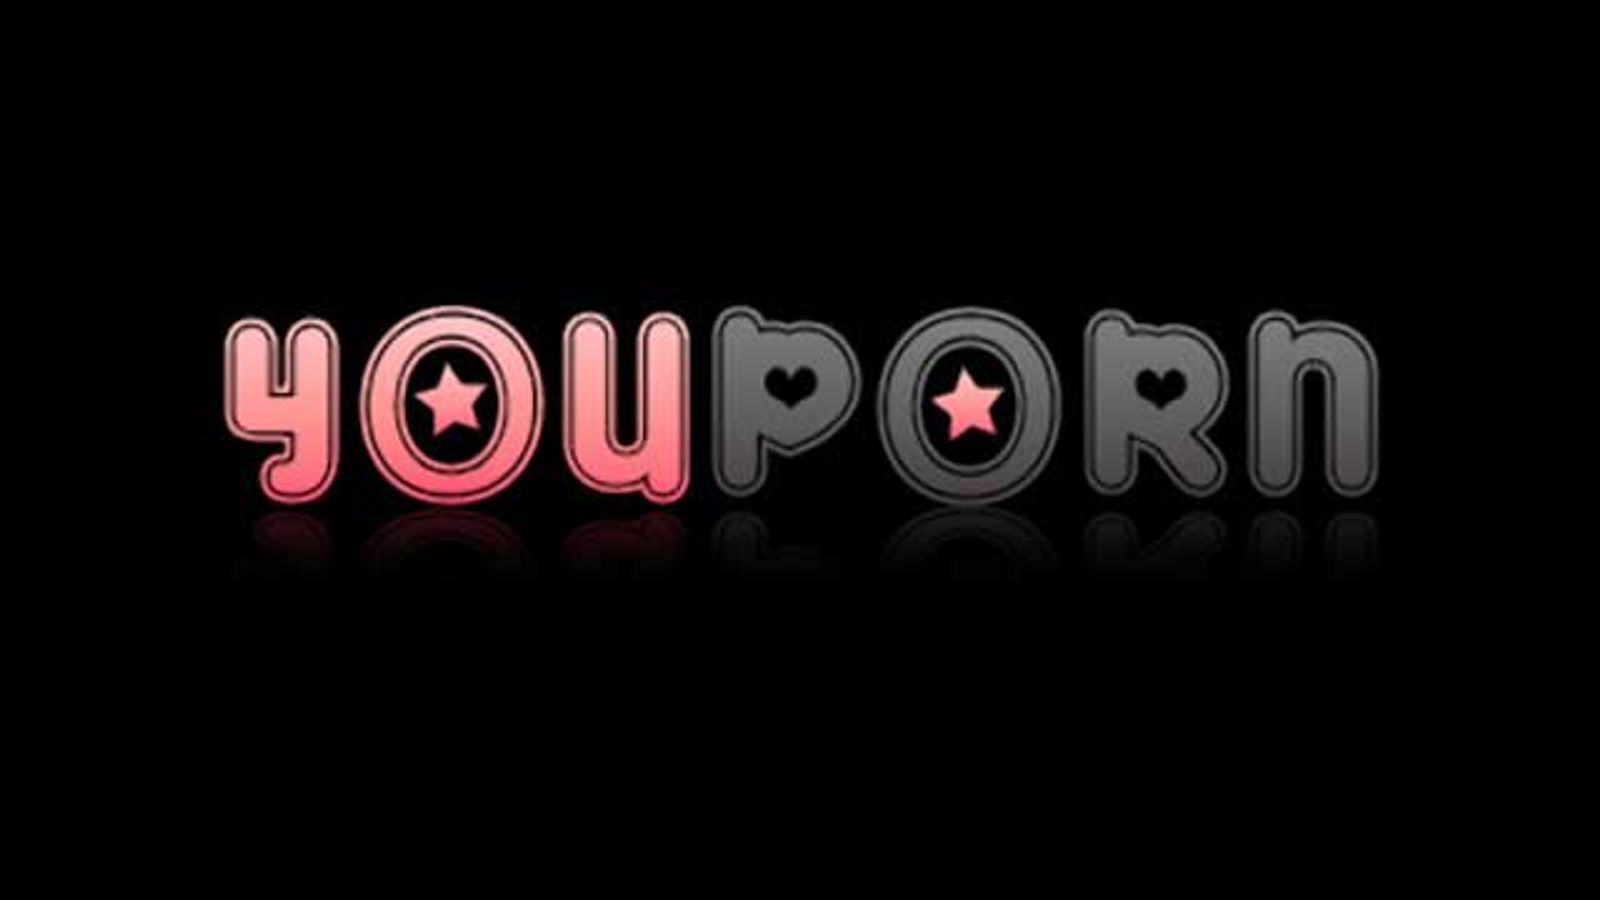 YouPorn Denies Compromise of a Million Users’ Data